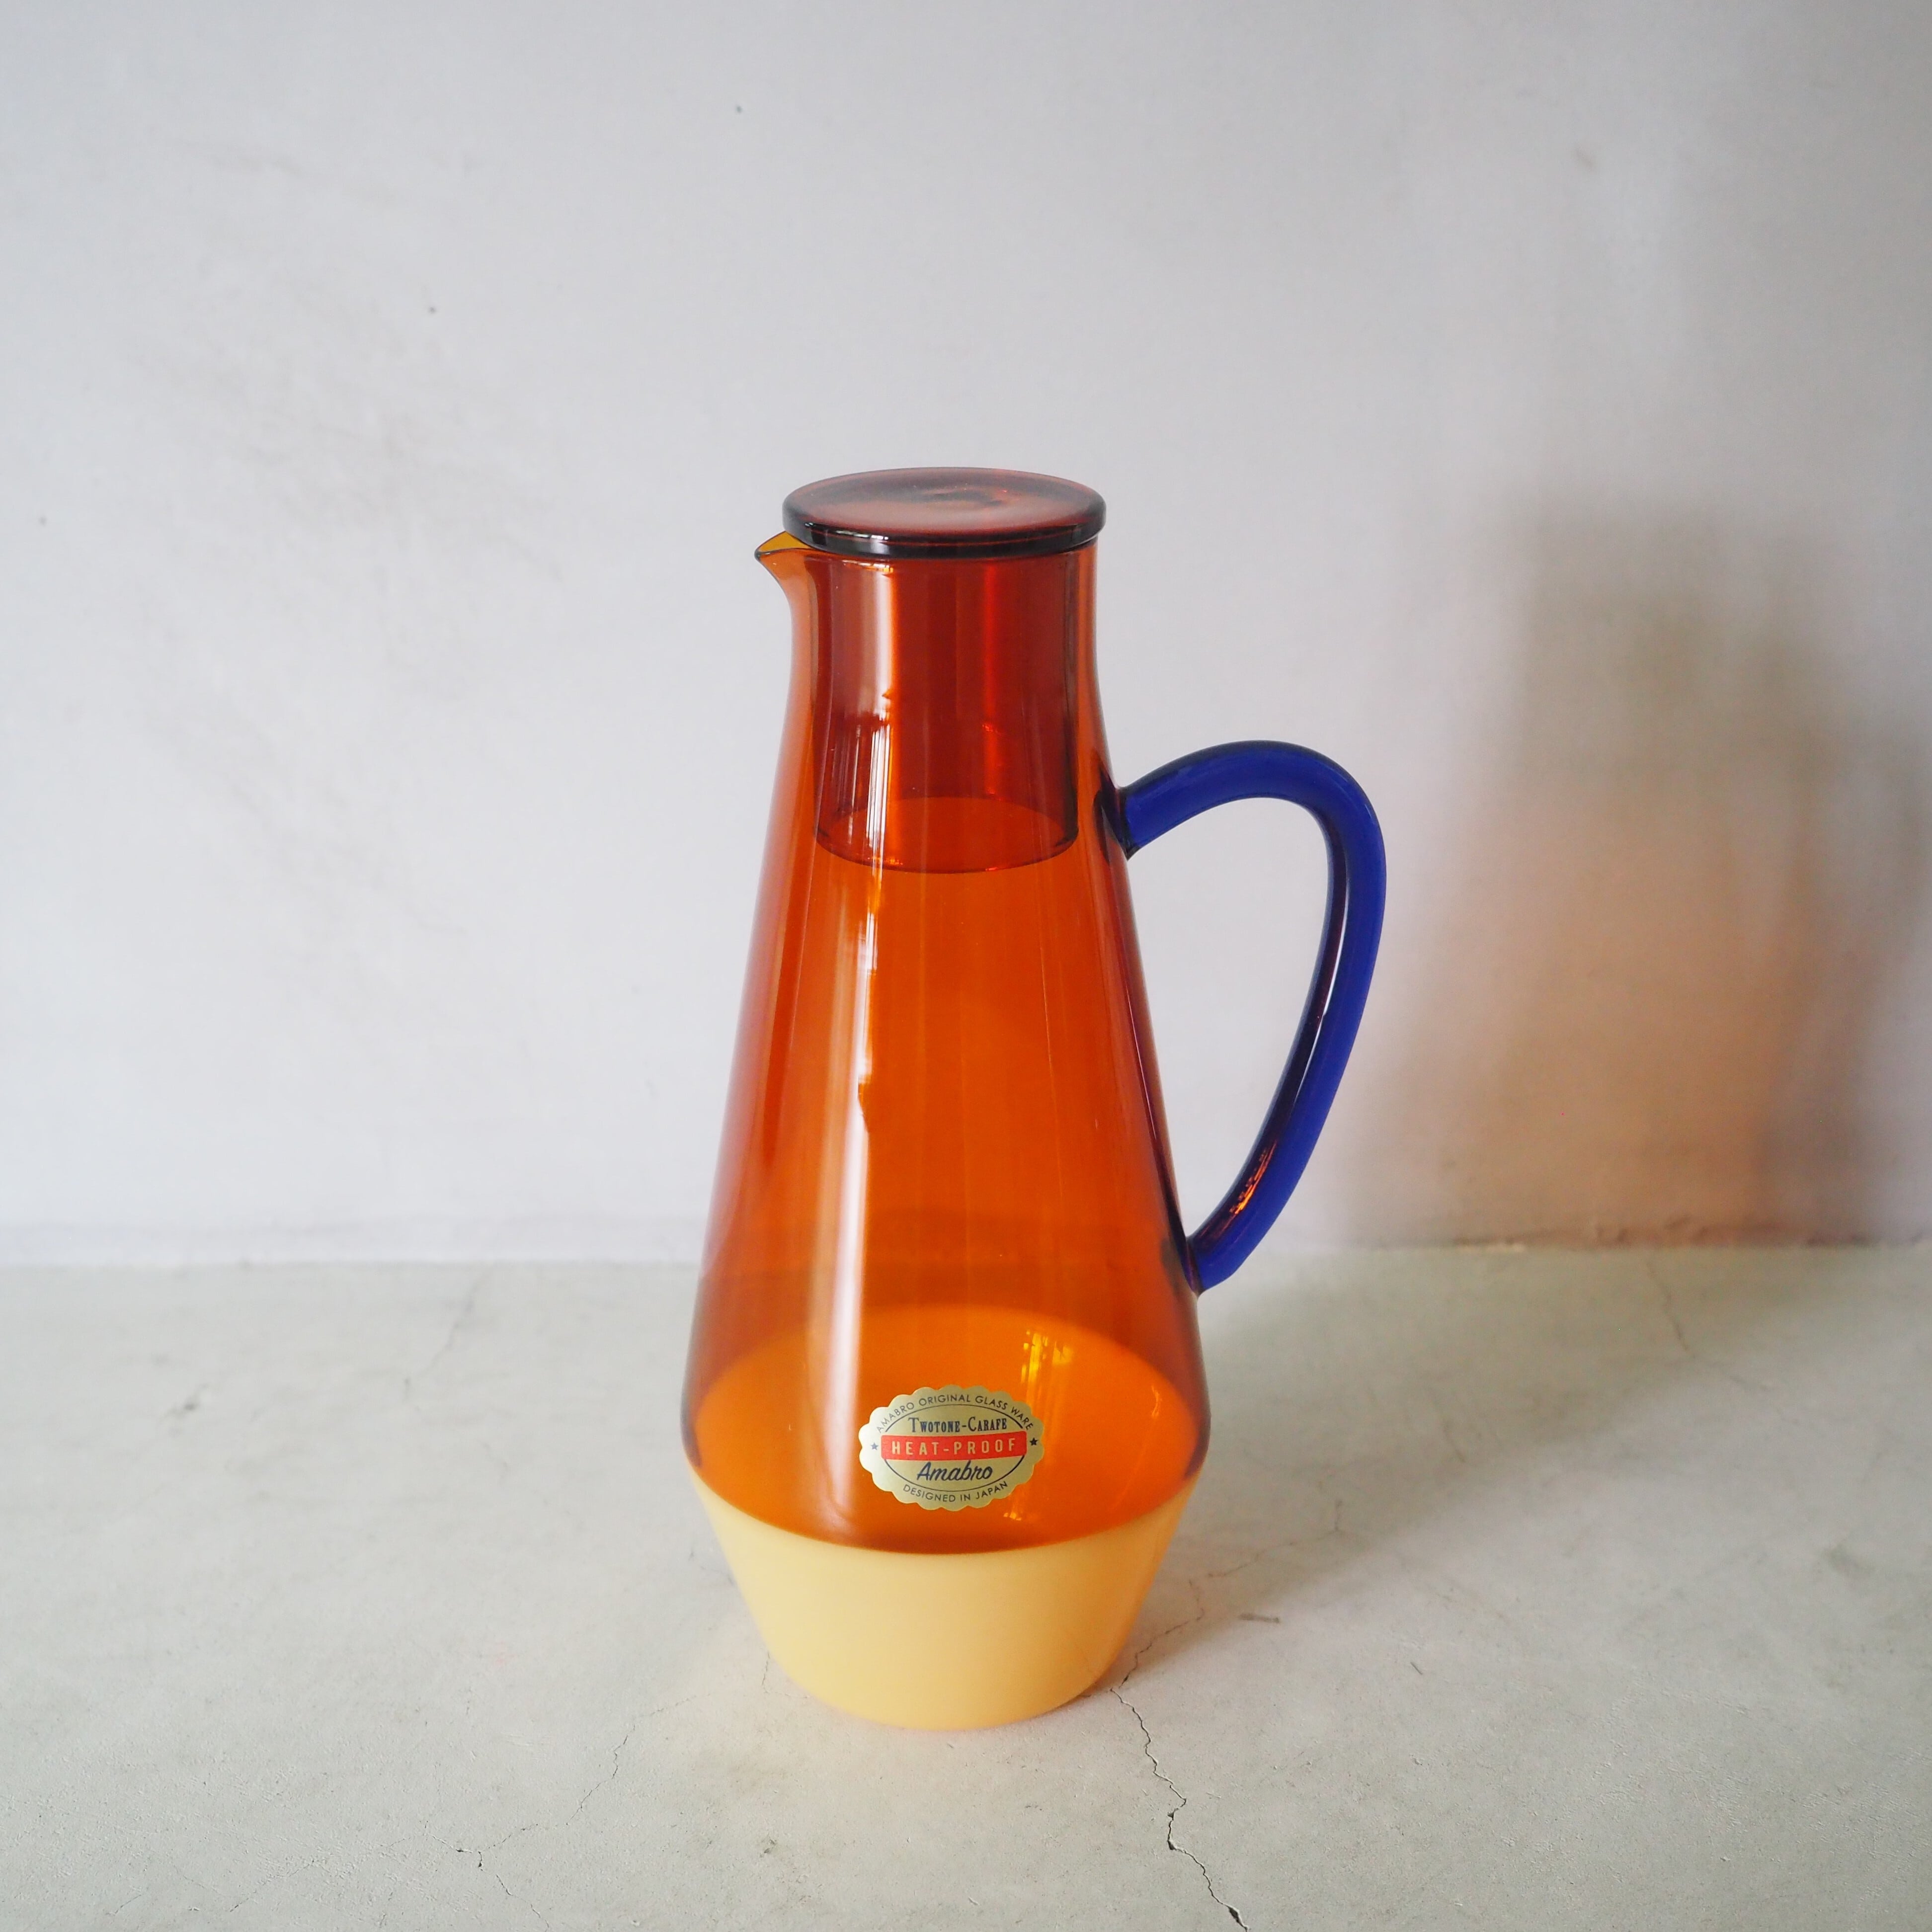 TWO TONE CARAFE AM